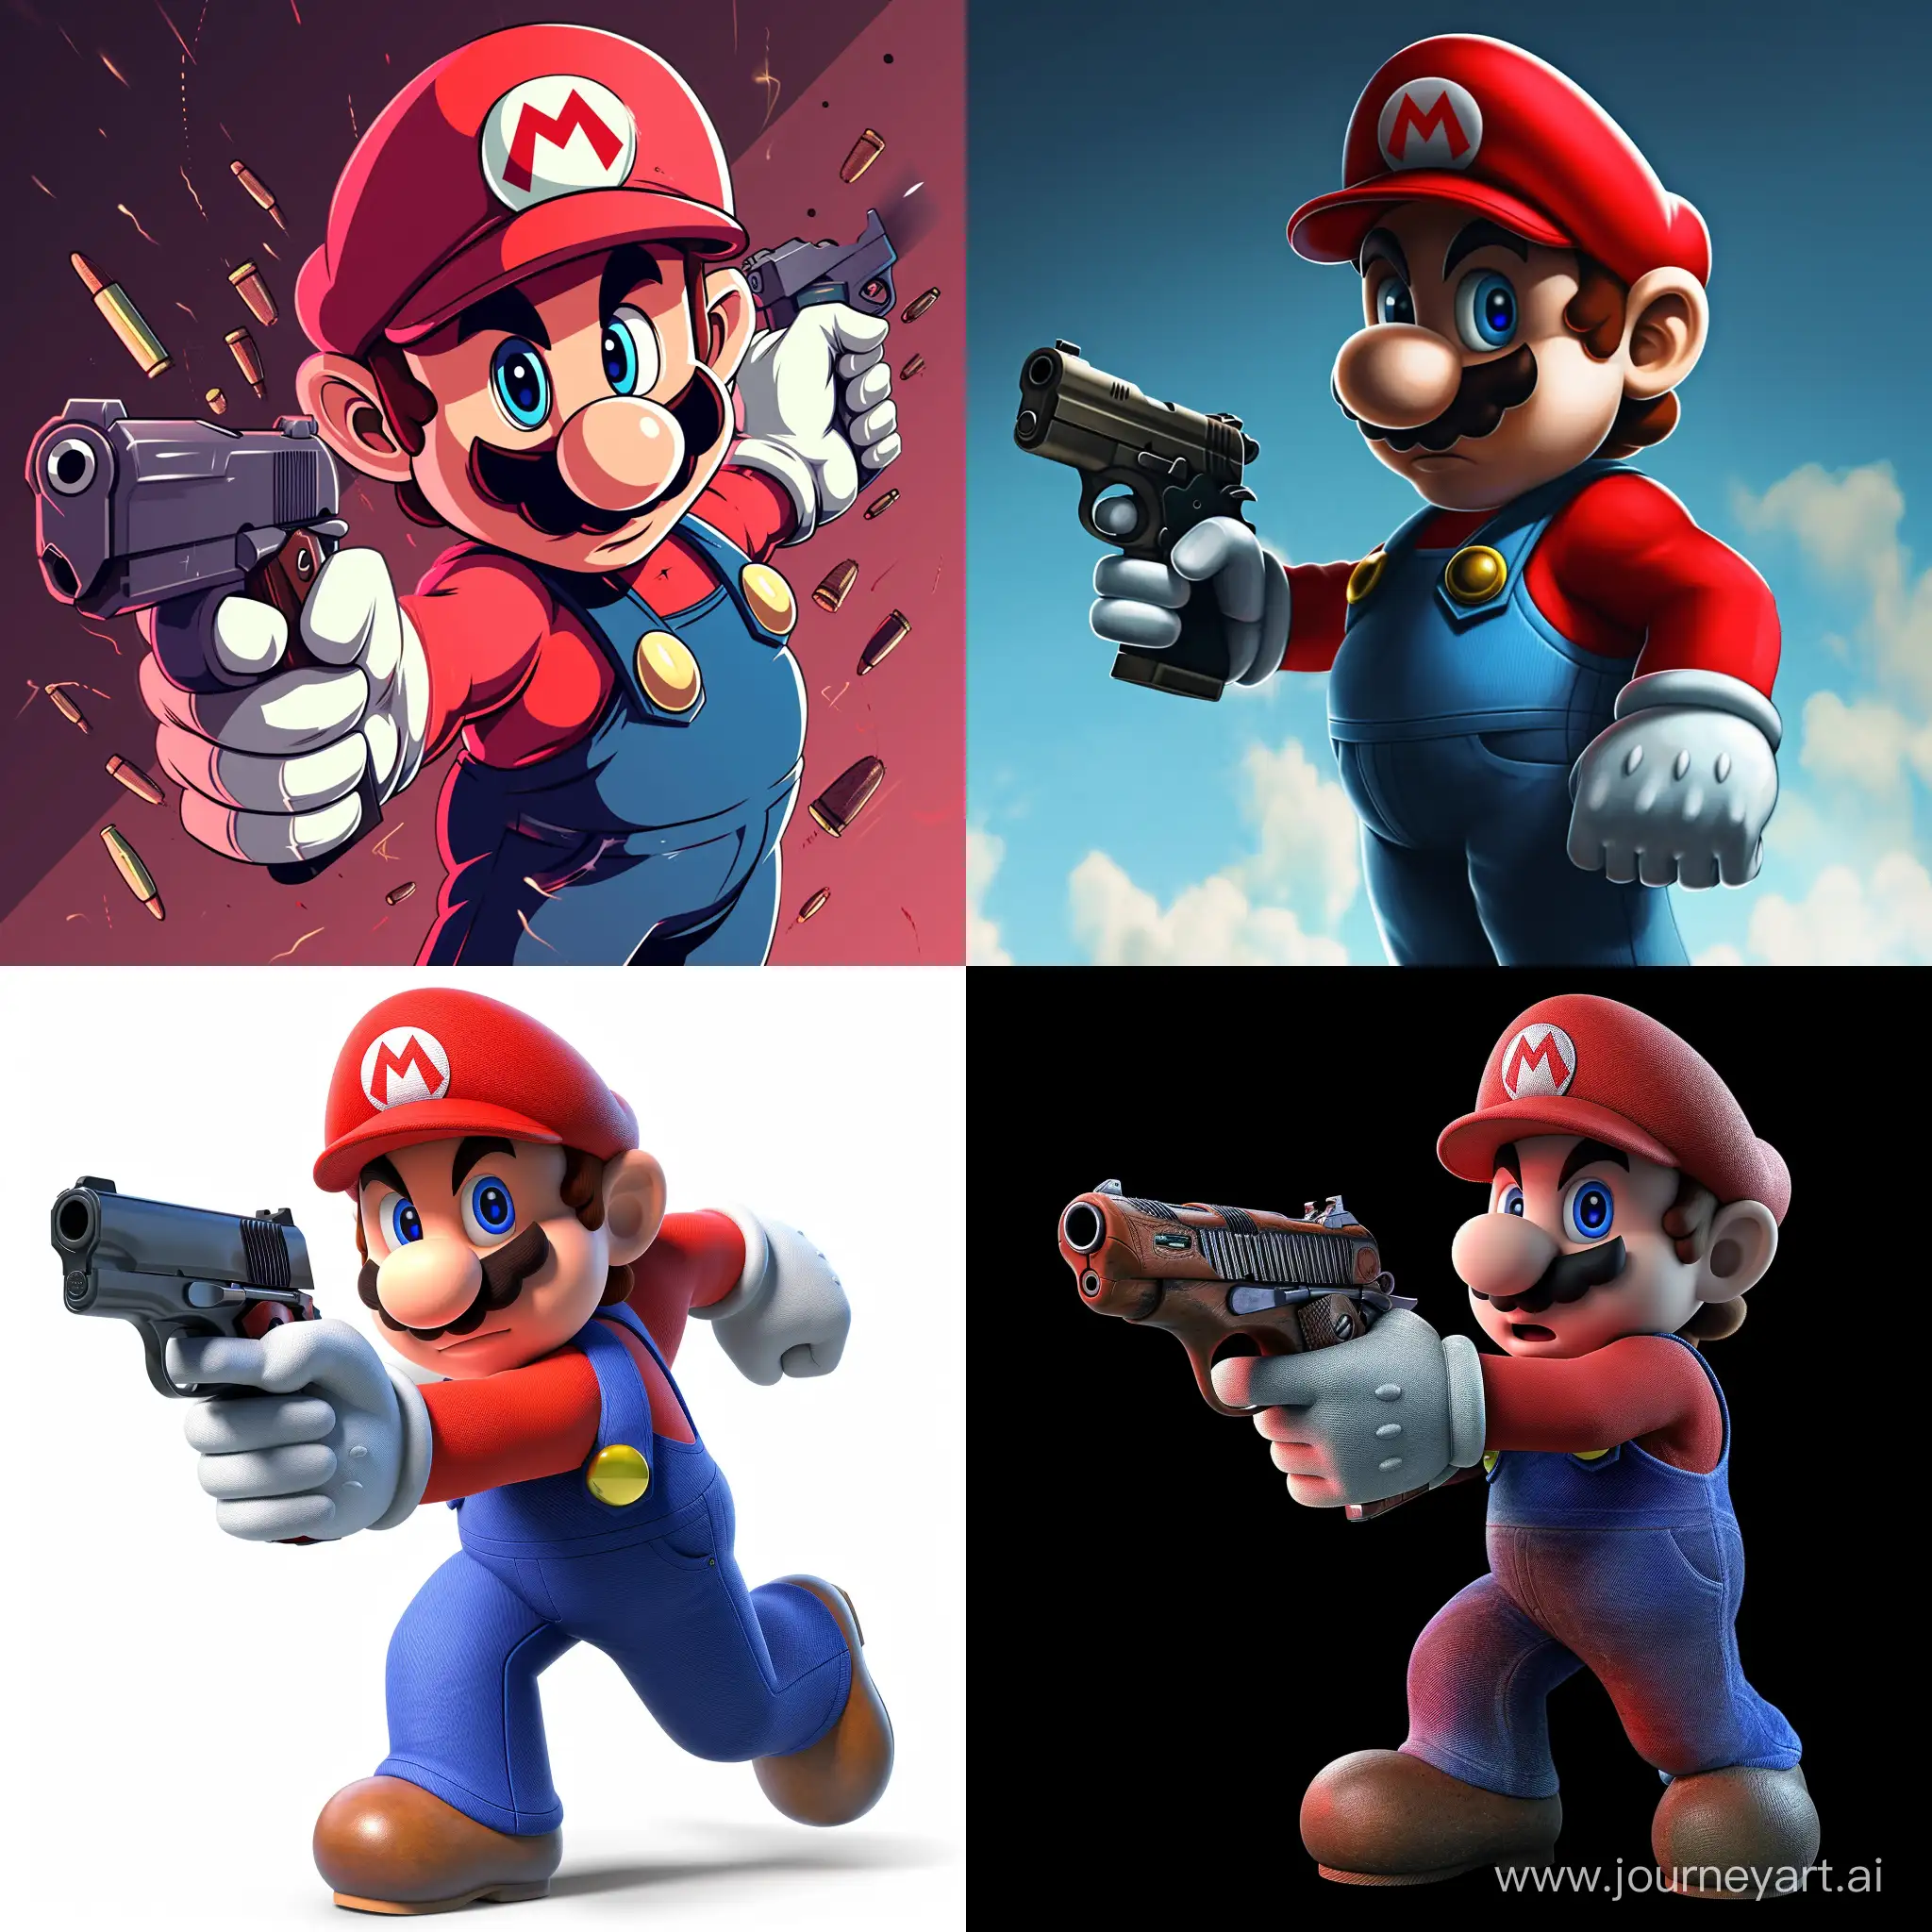 Mario-Armed-with-a-Gun-in-Pixel-Art-Style